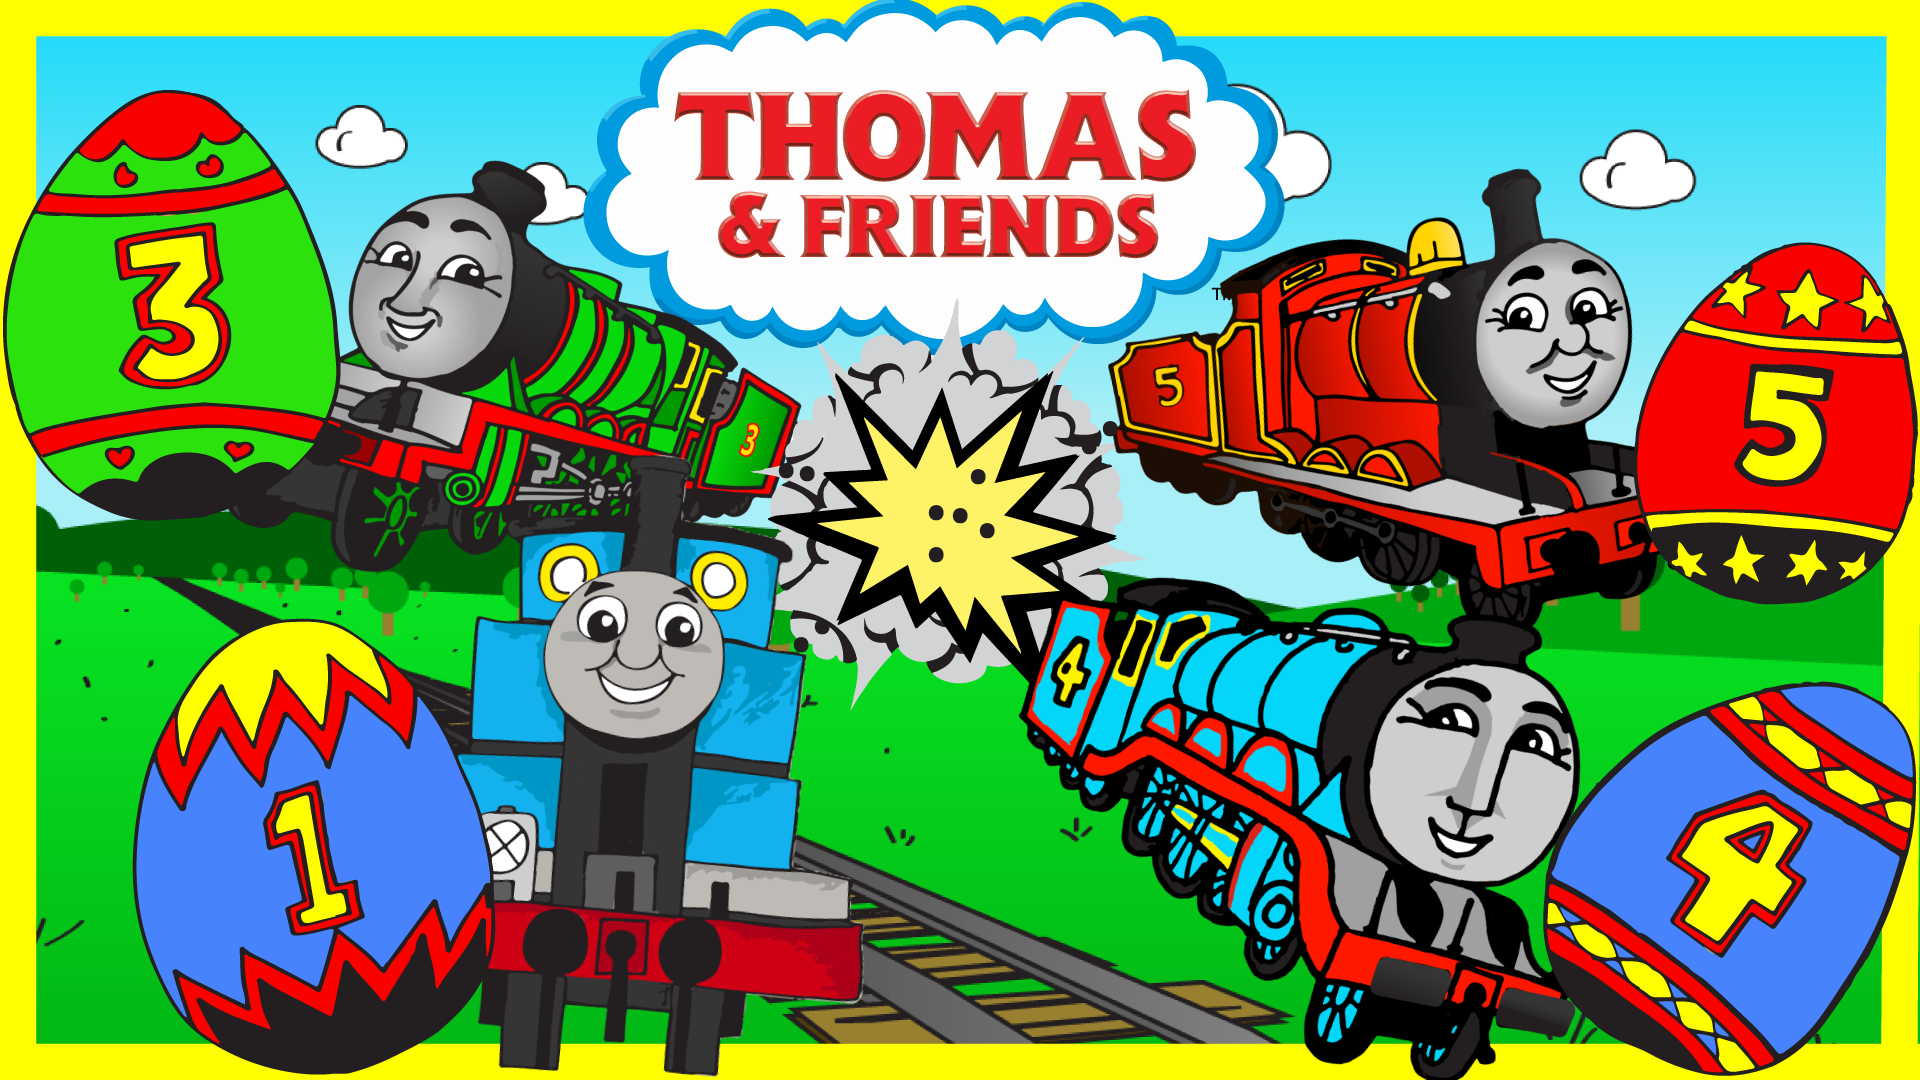 Jump to Thomas and Friends Surprise Eggs